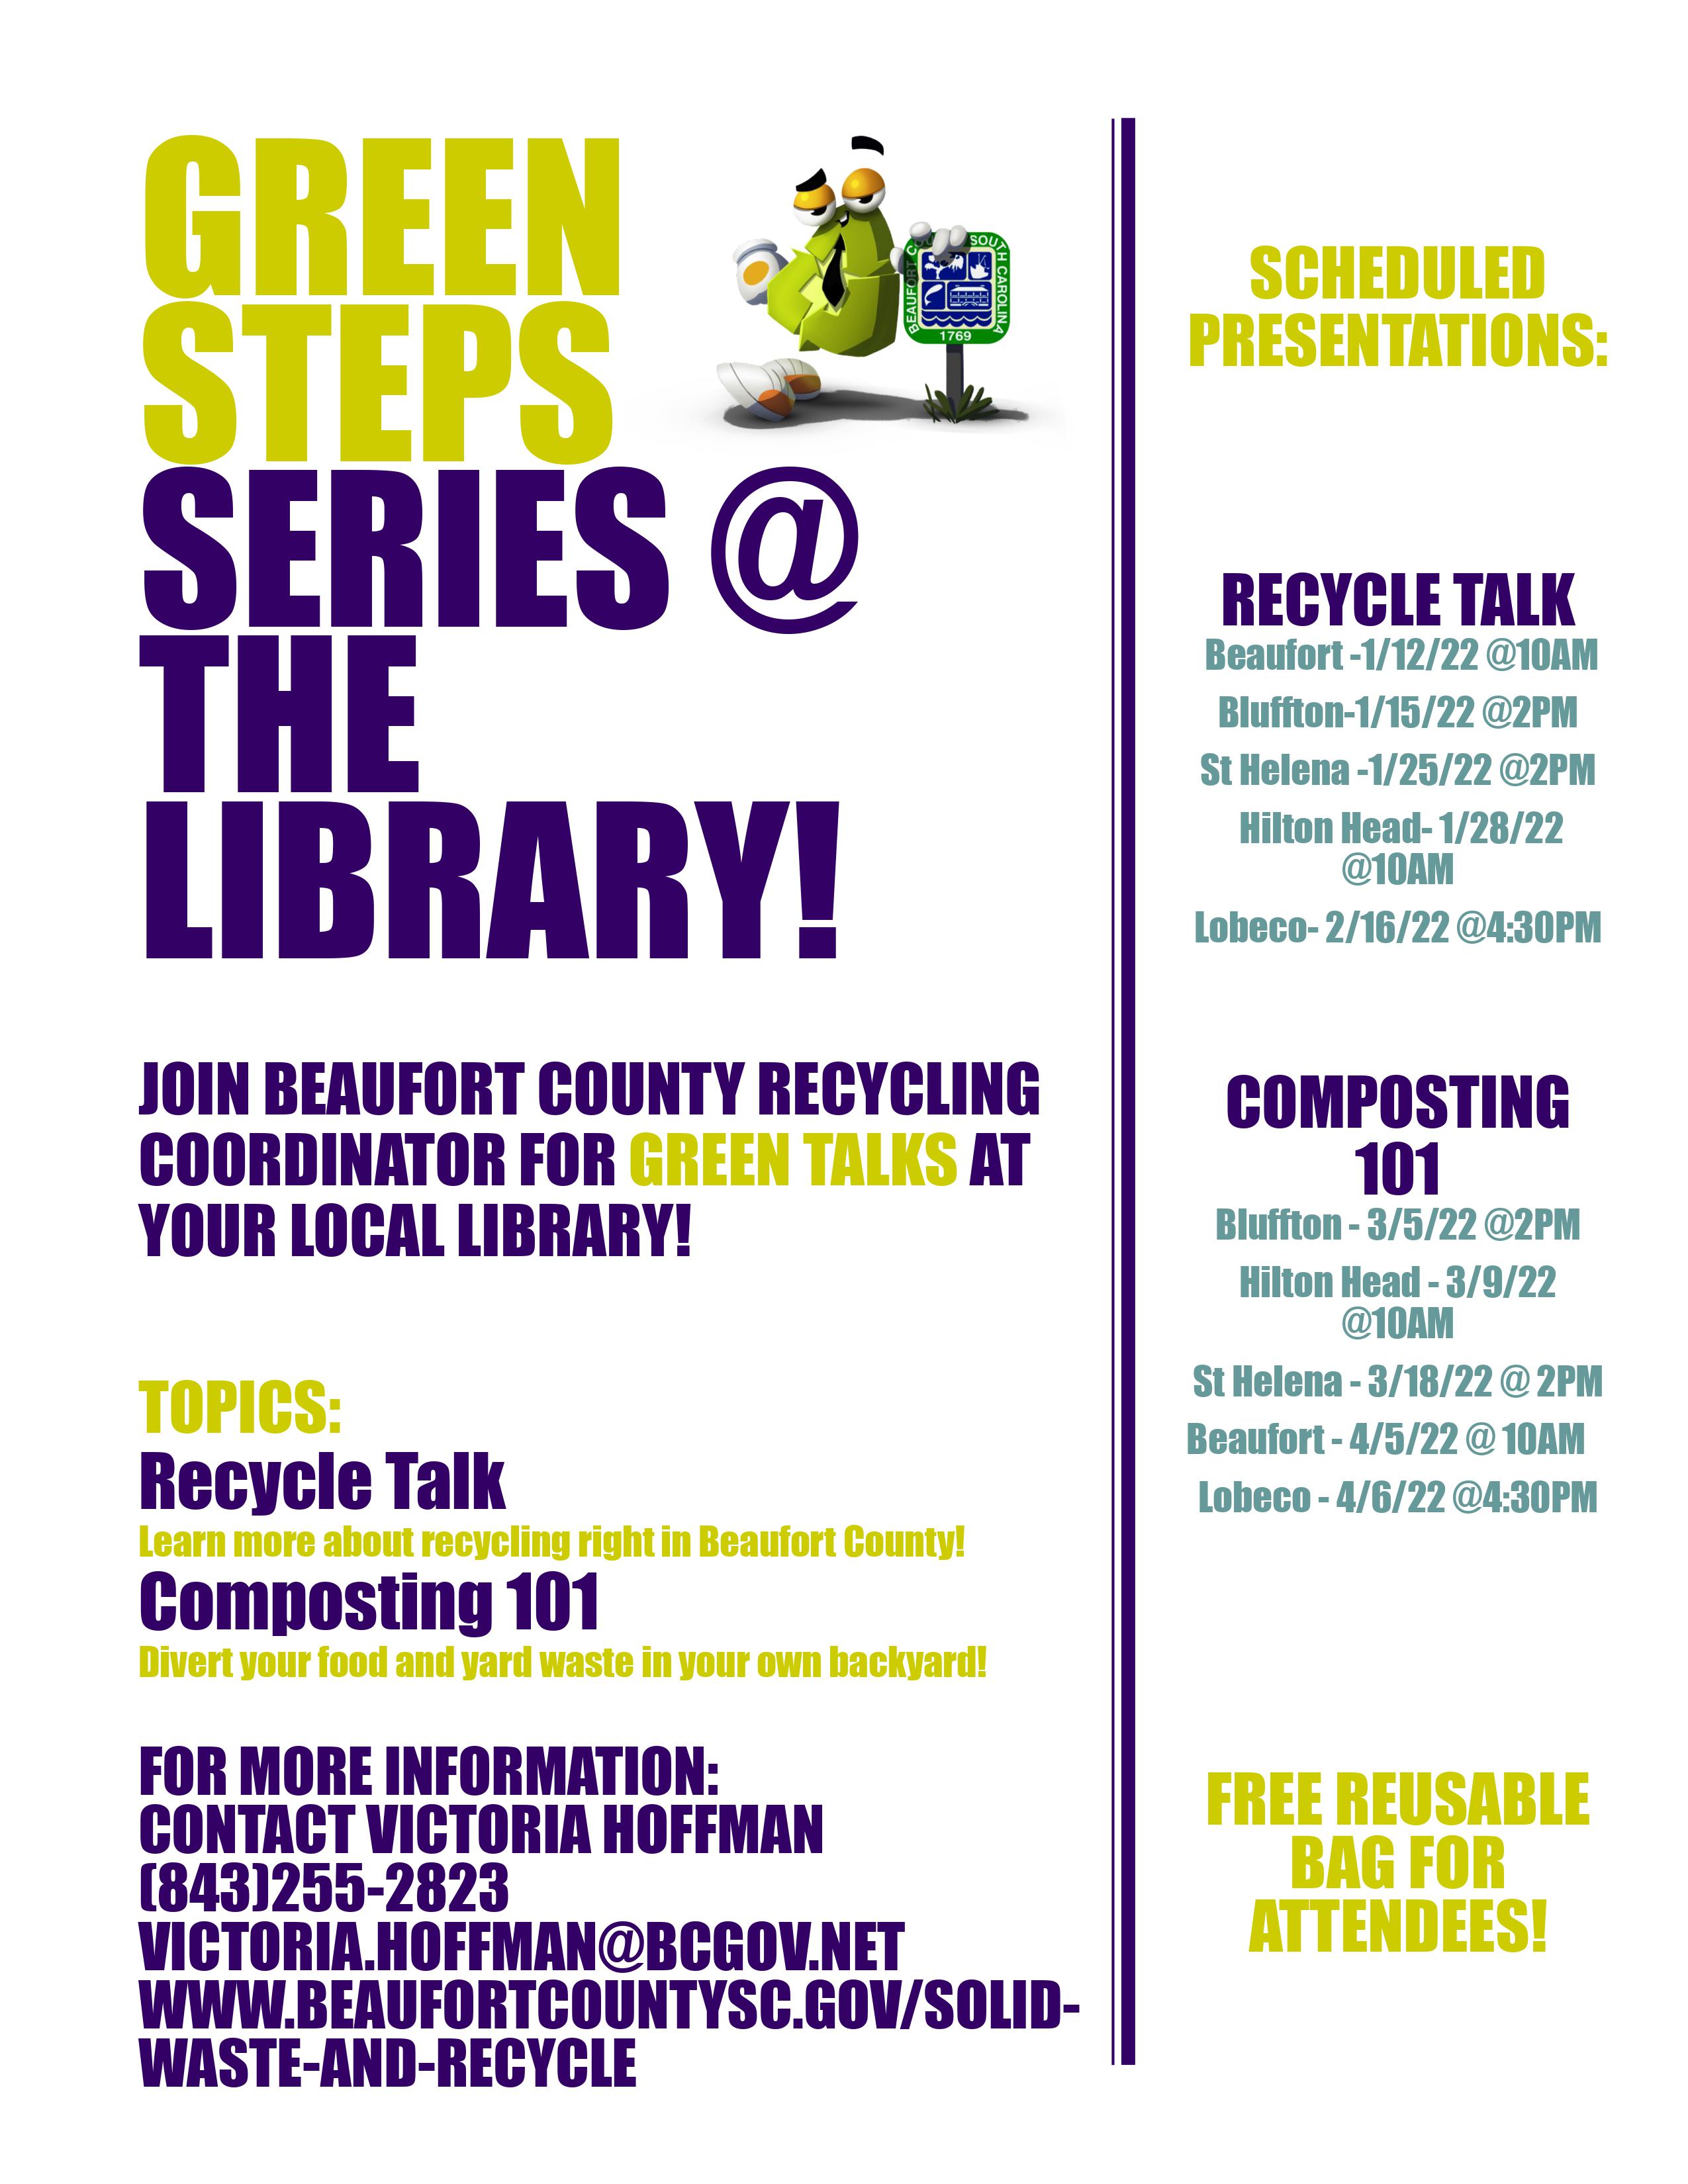 Beaufort County Solid Waste and Recycling Offers Series Called “Green Steps” on Recycling and Composting 101 